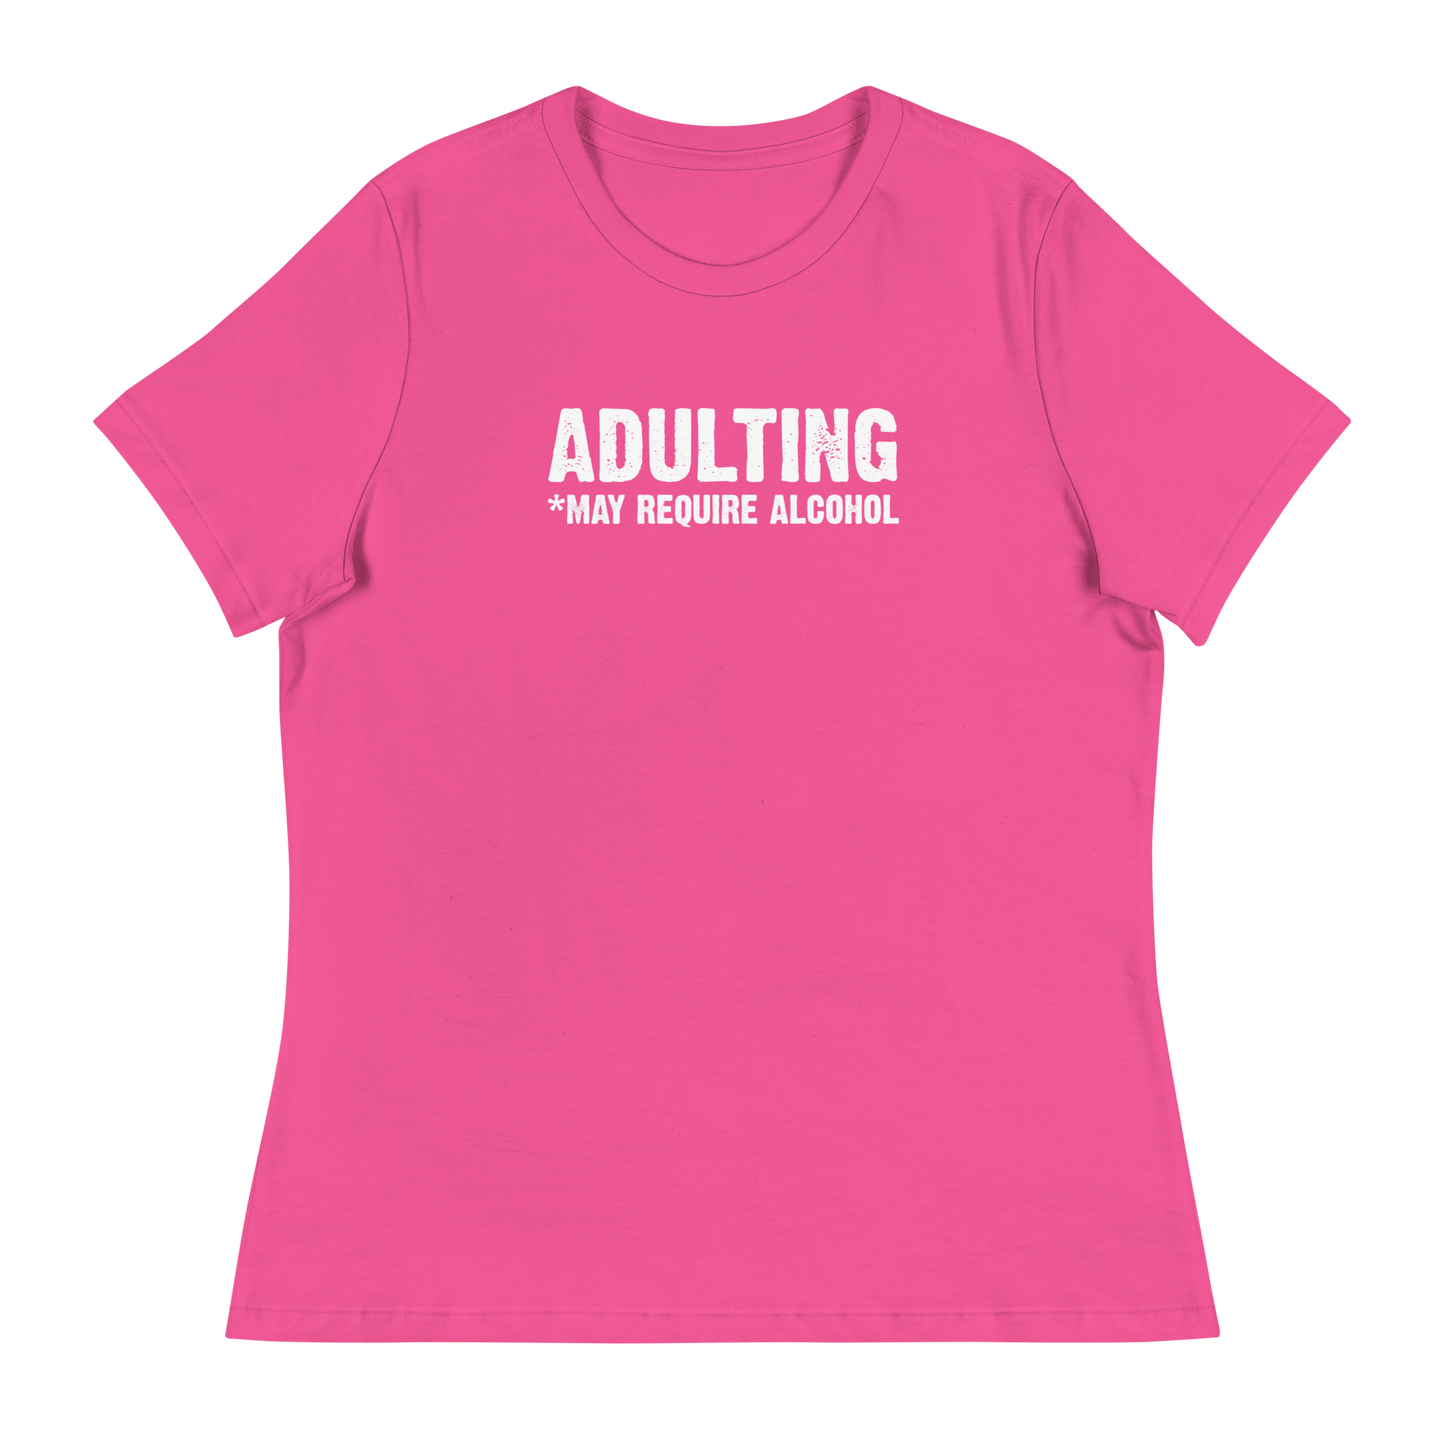 Women's - Adulting *May Require Alcohol - Funny T-Shirt